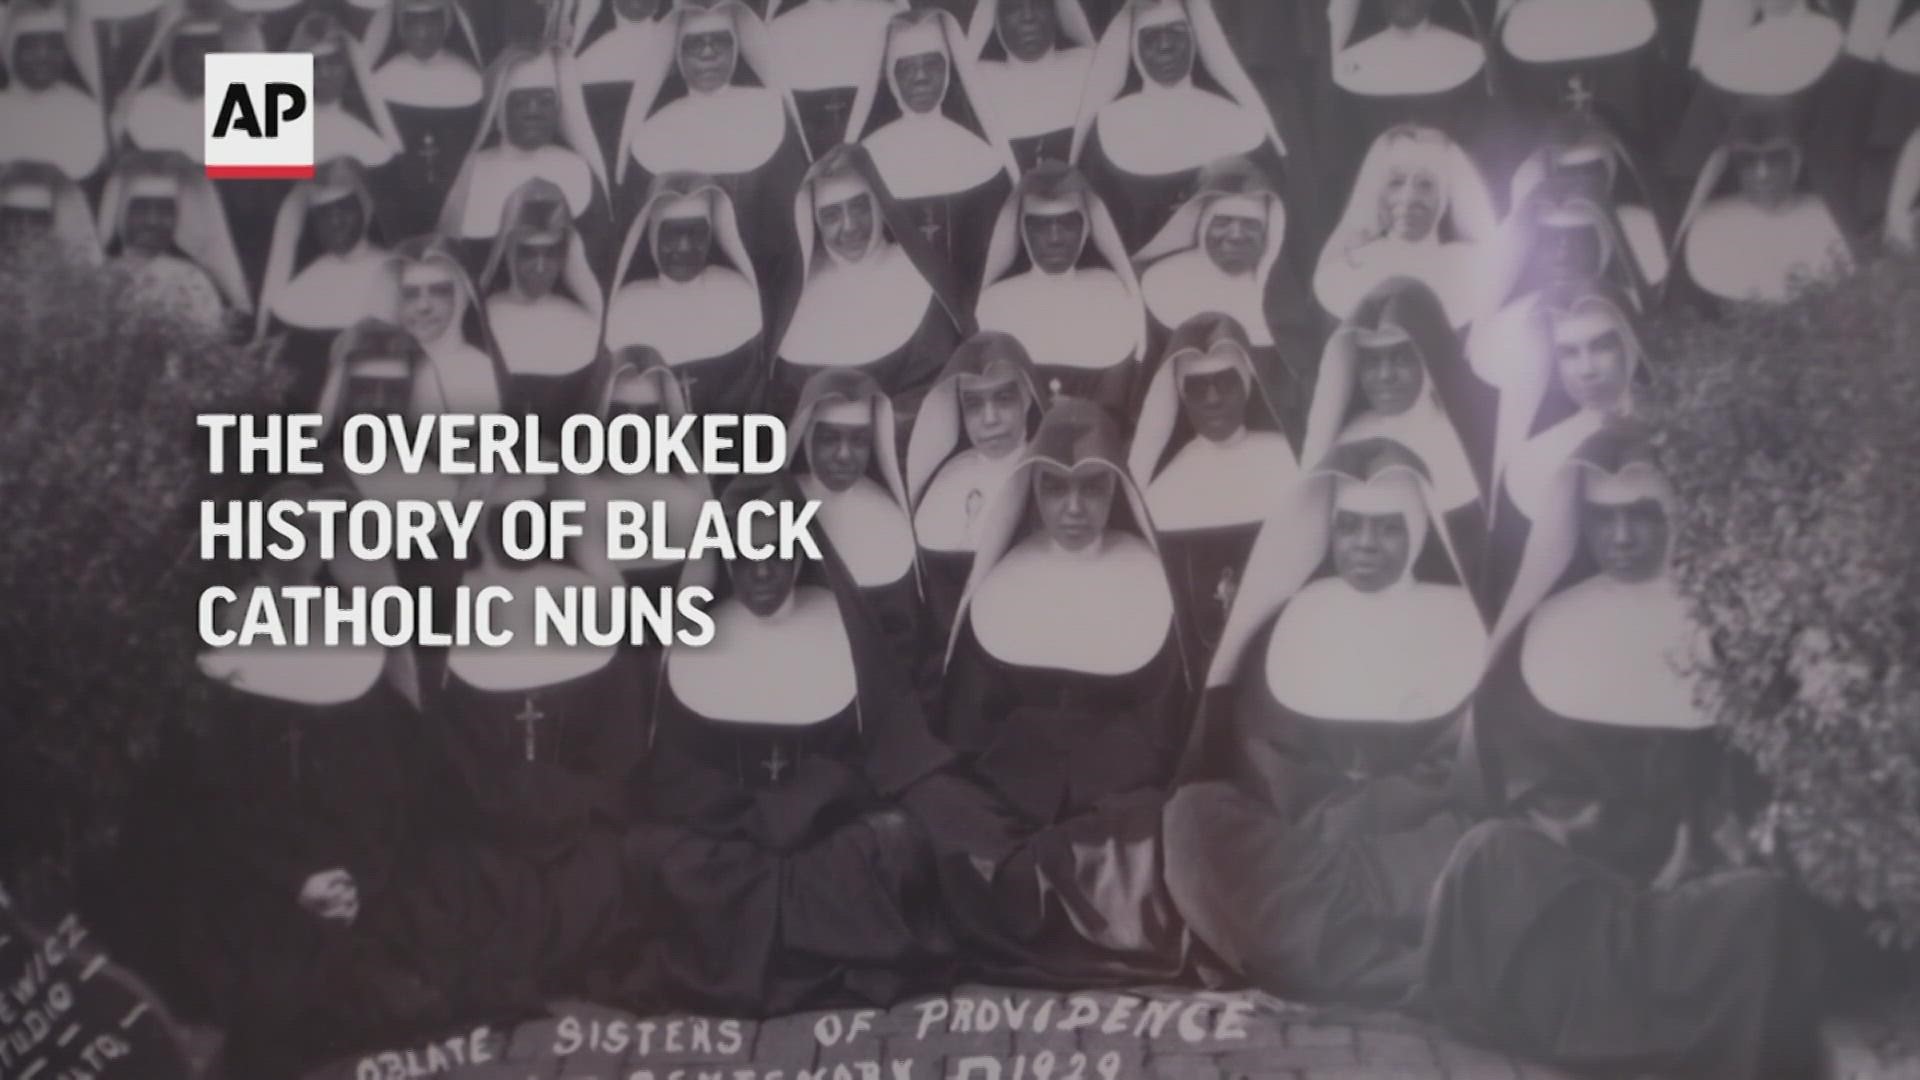 For 14 years Shannen Dee Williams has collected the stories of America's Black nuns. In May, she'll publish the comprehensive history.